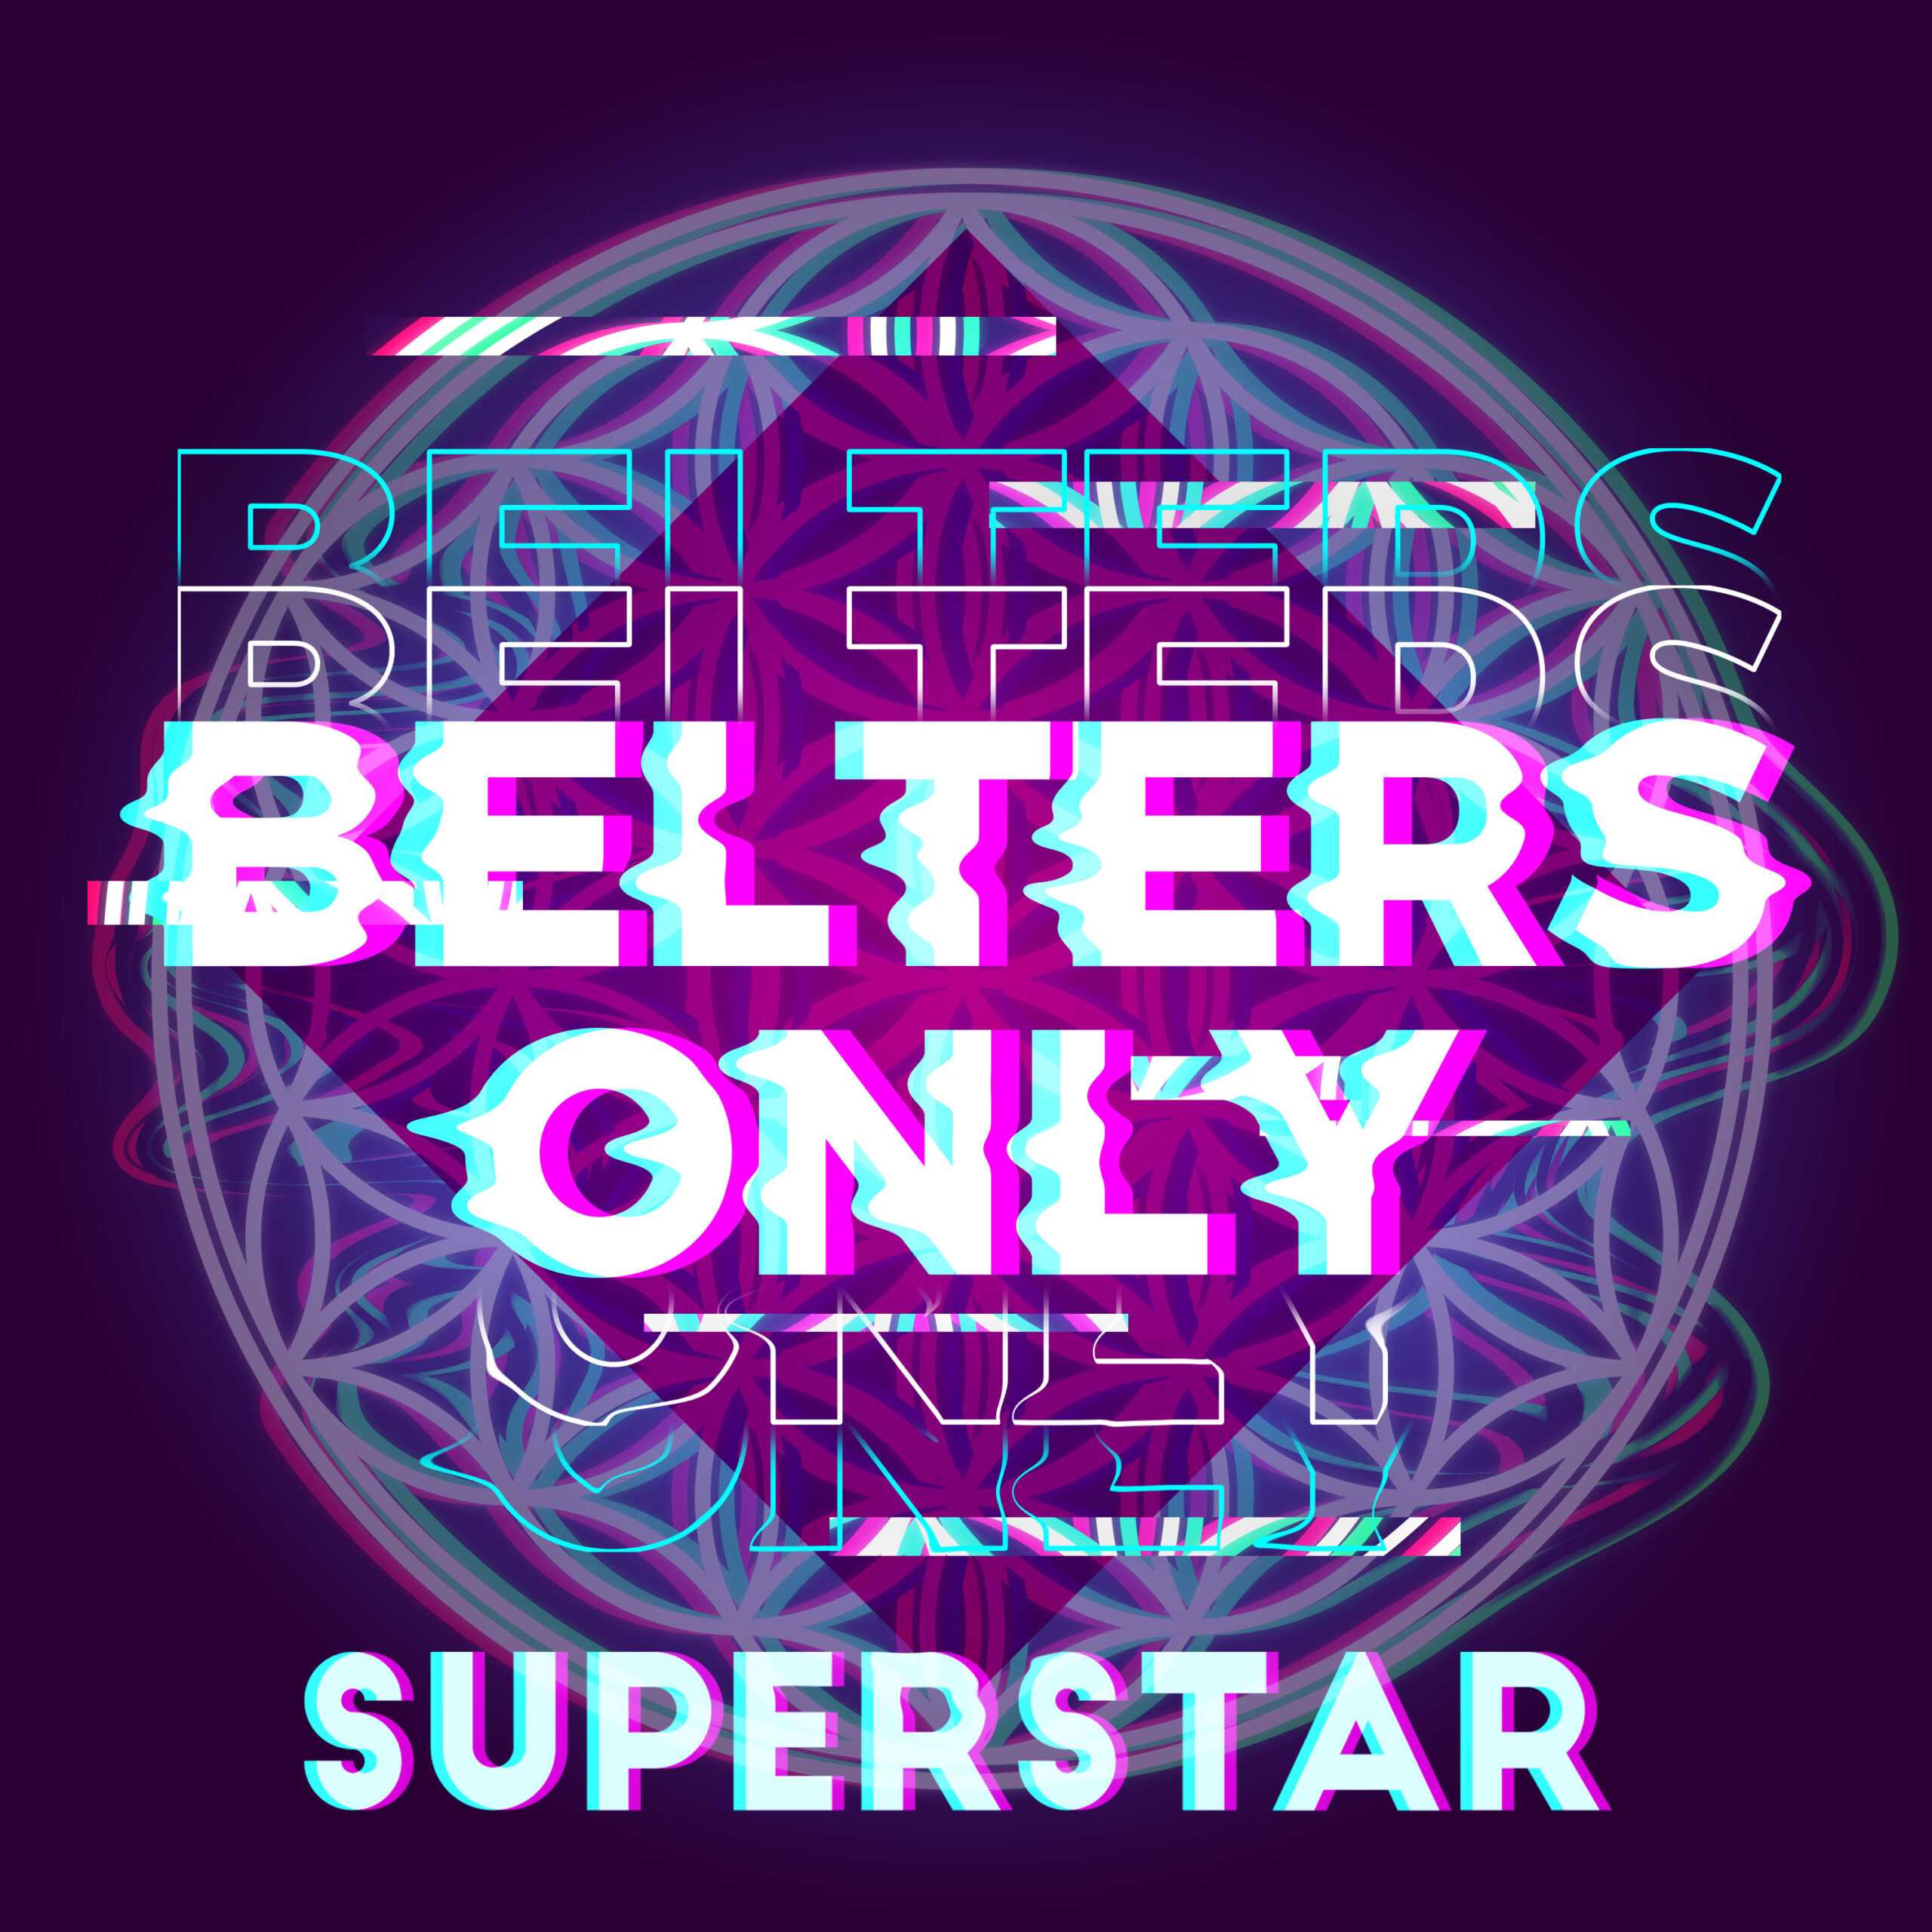 Belters Only & Micky Modelle featuring Simone Denny — Superstar cover artwork